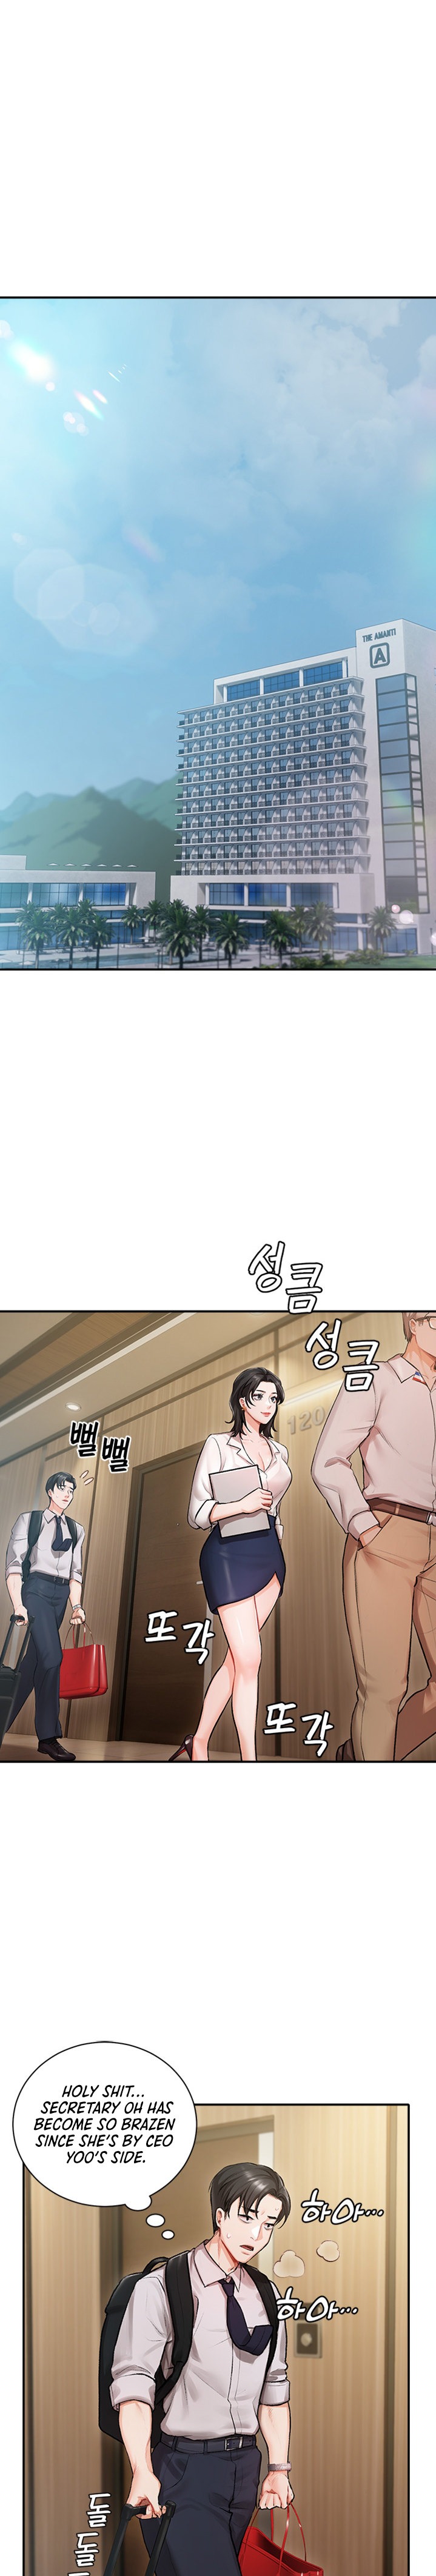 Hyeonjung’s Residence - Chapter 1 Page 7